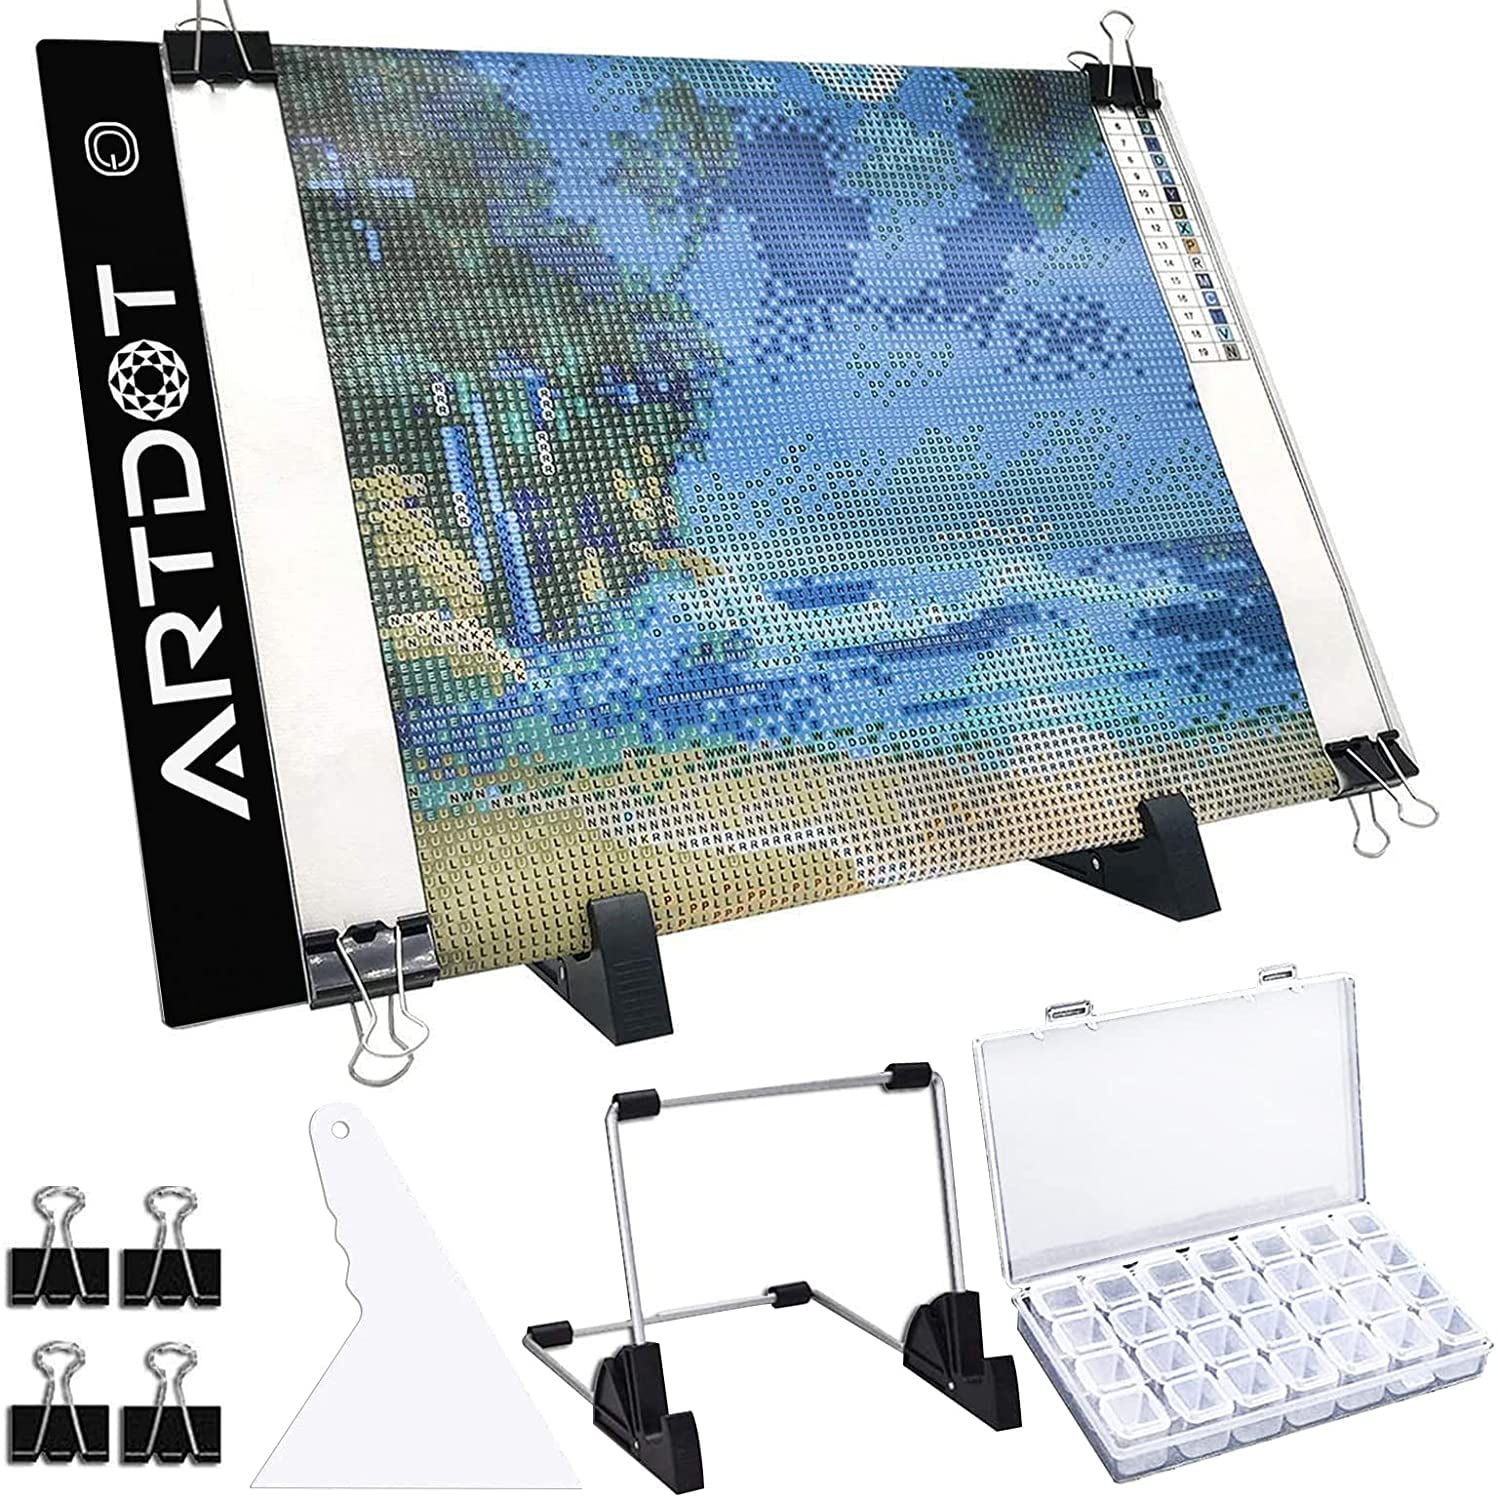 ARTDOT A4 LED Light Board for Diamond Painting Kits, USB Powered Light Pad, Adjustable Brightness with Detachable Stand and Clips, Size: 13.2 x 9.2